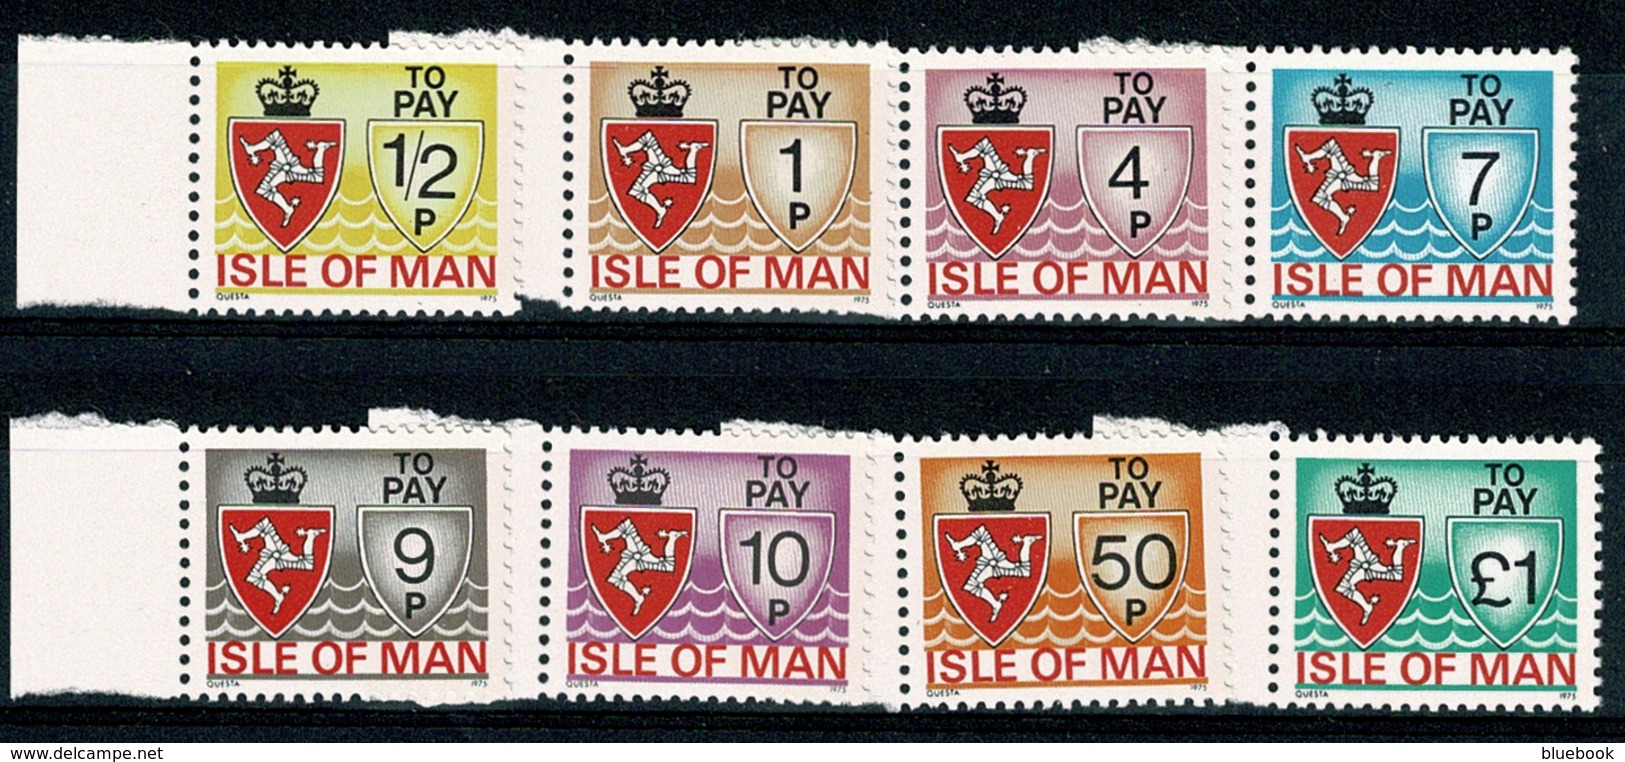 Ref 1236 - Isle Of Man Postage Due Stamps 1/2p - £1 MNH - Isle Of Man